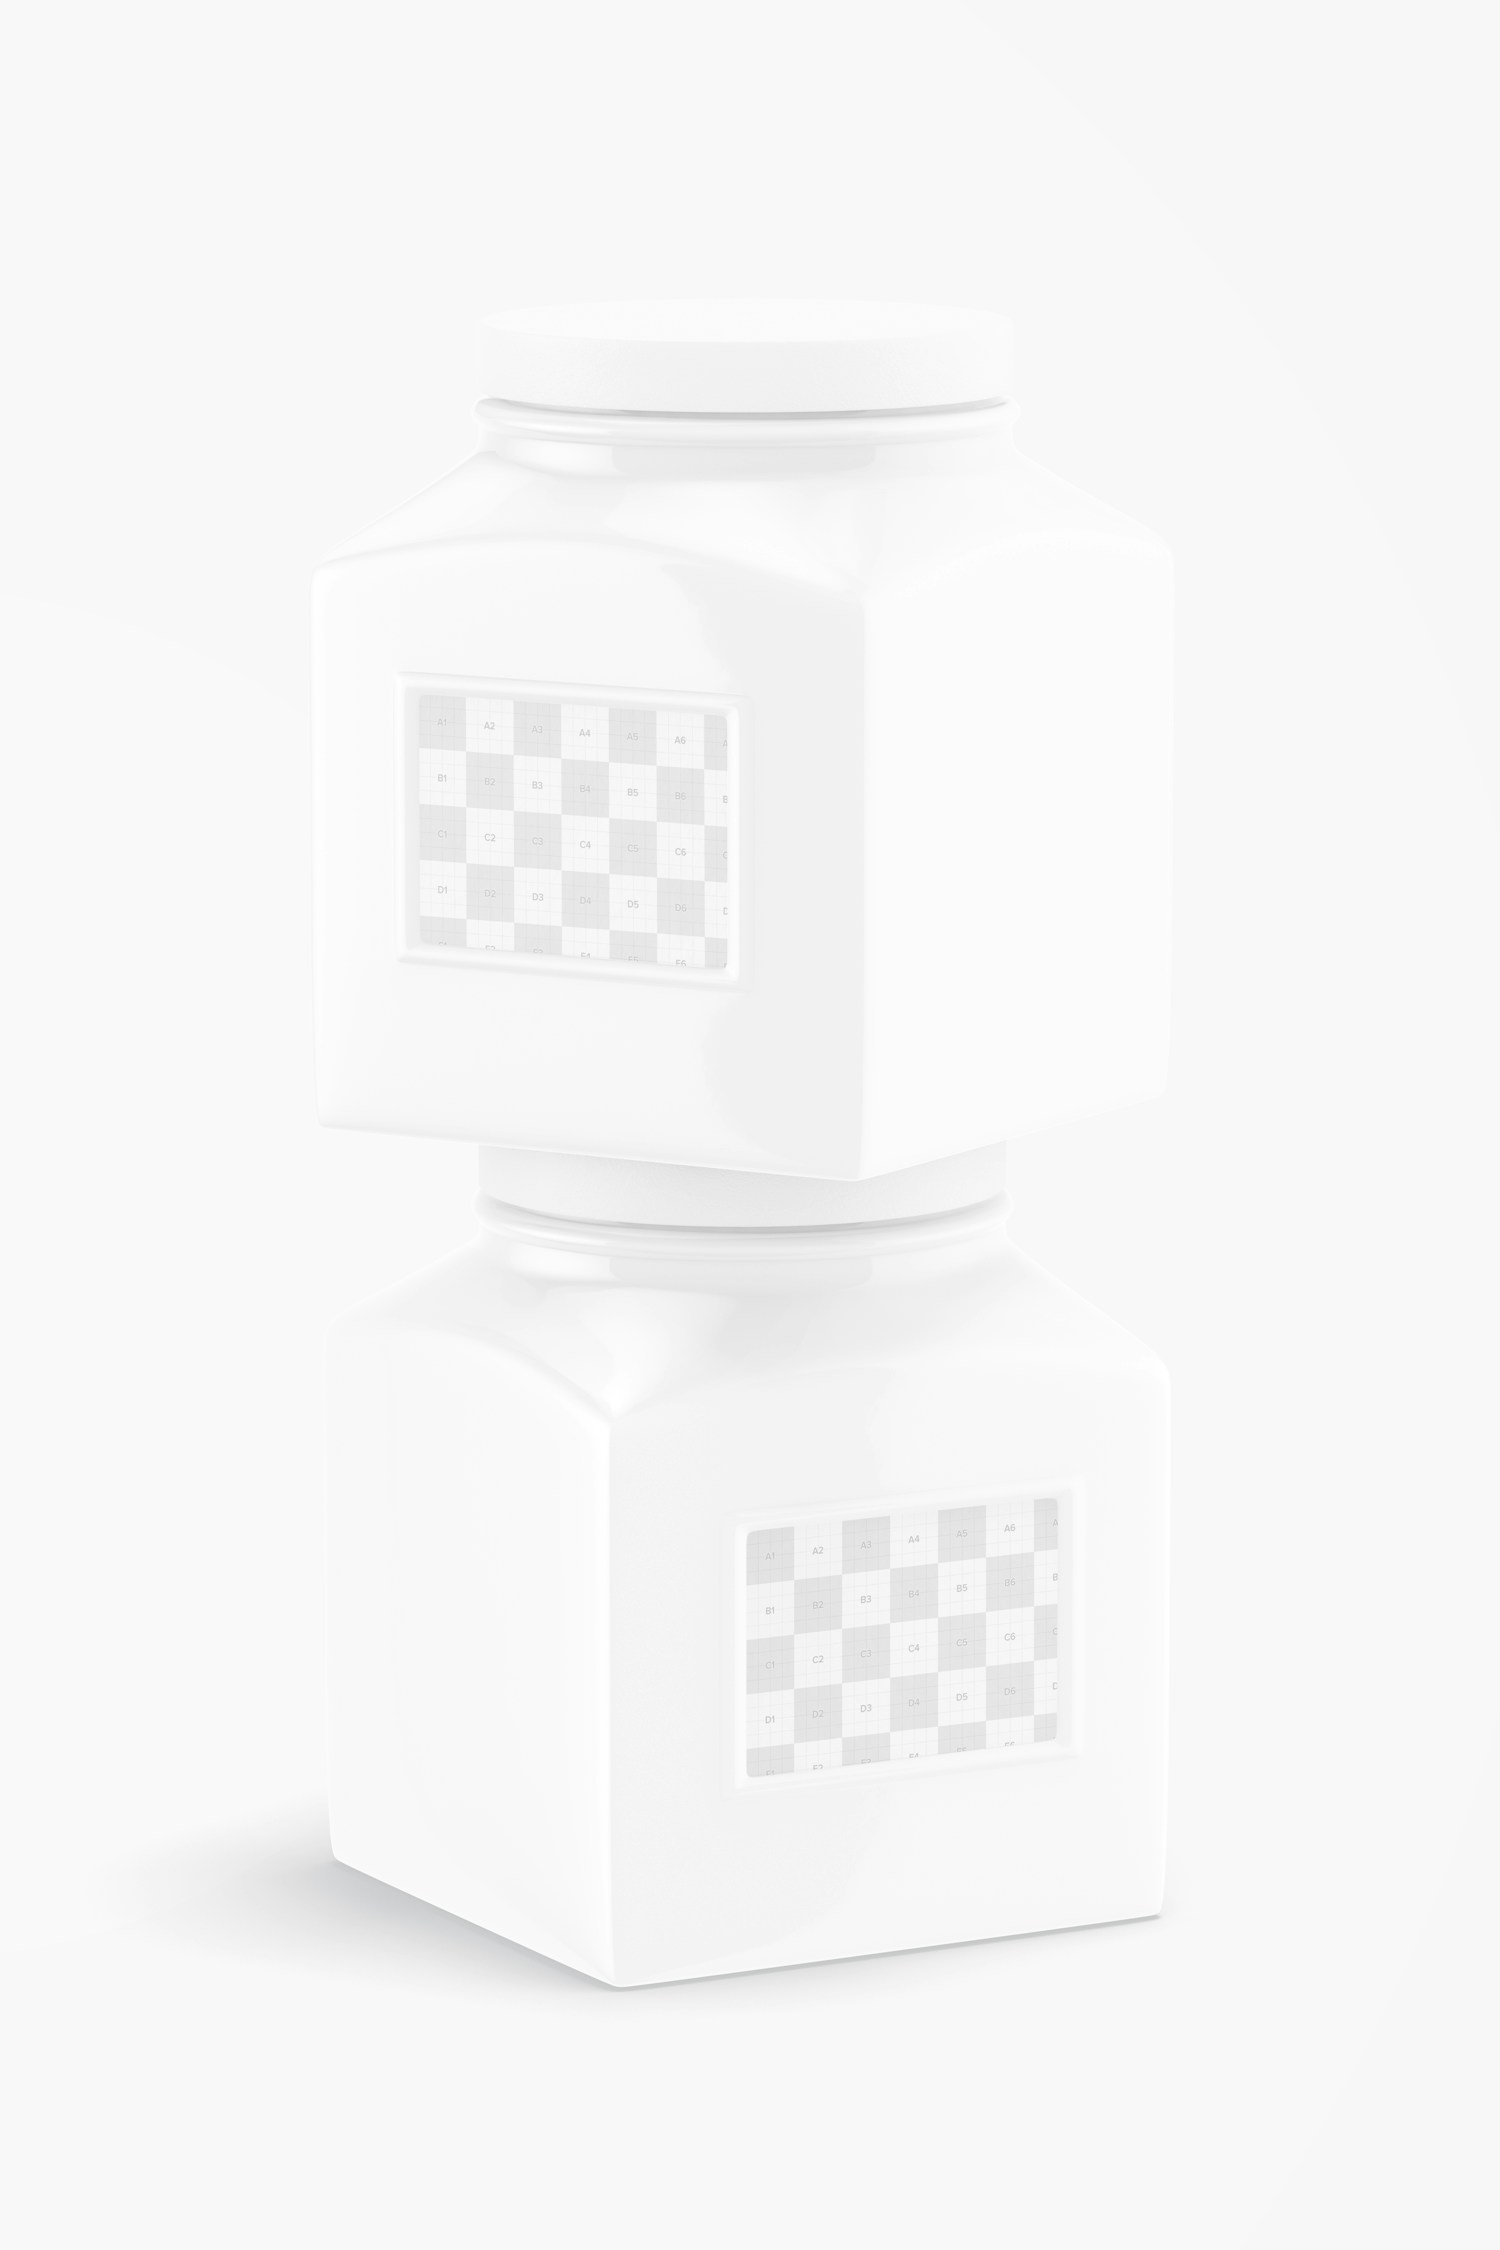 Square Ceramic Canisters Mockup, Stacked